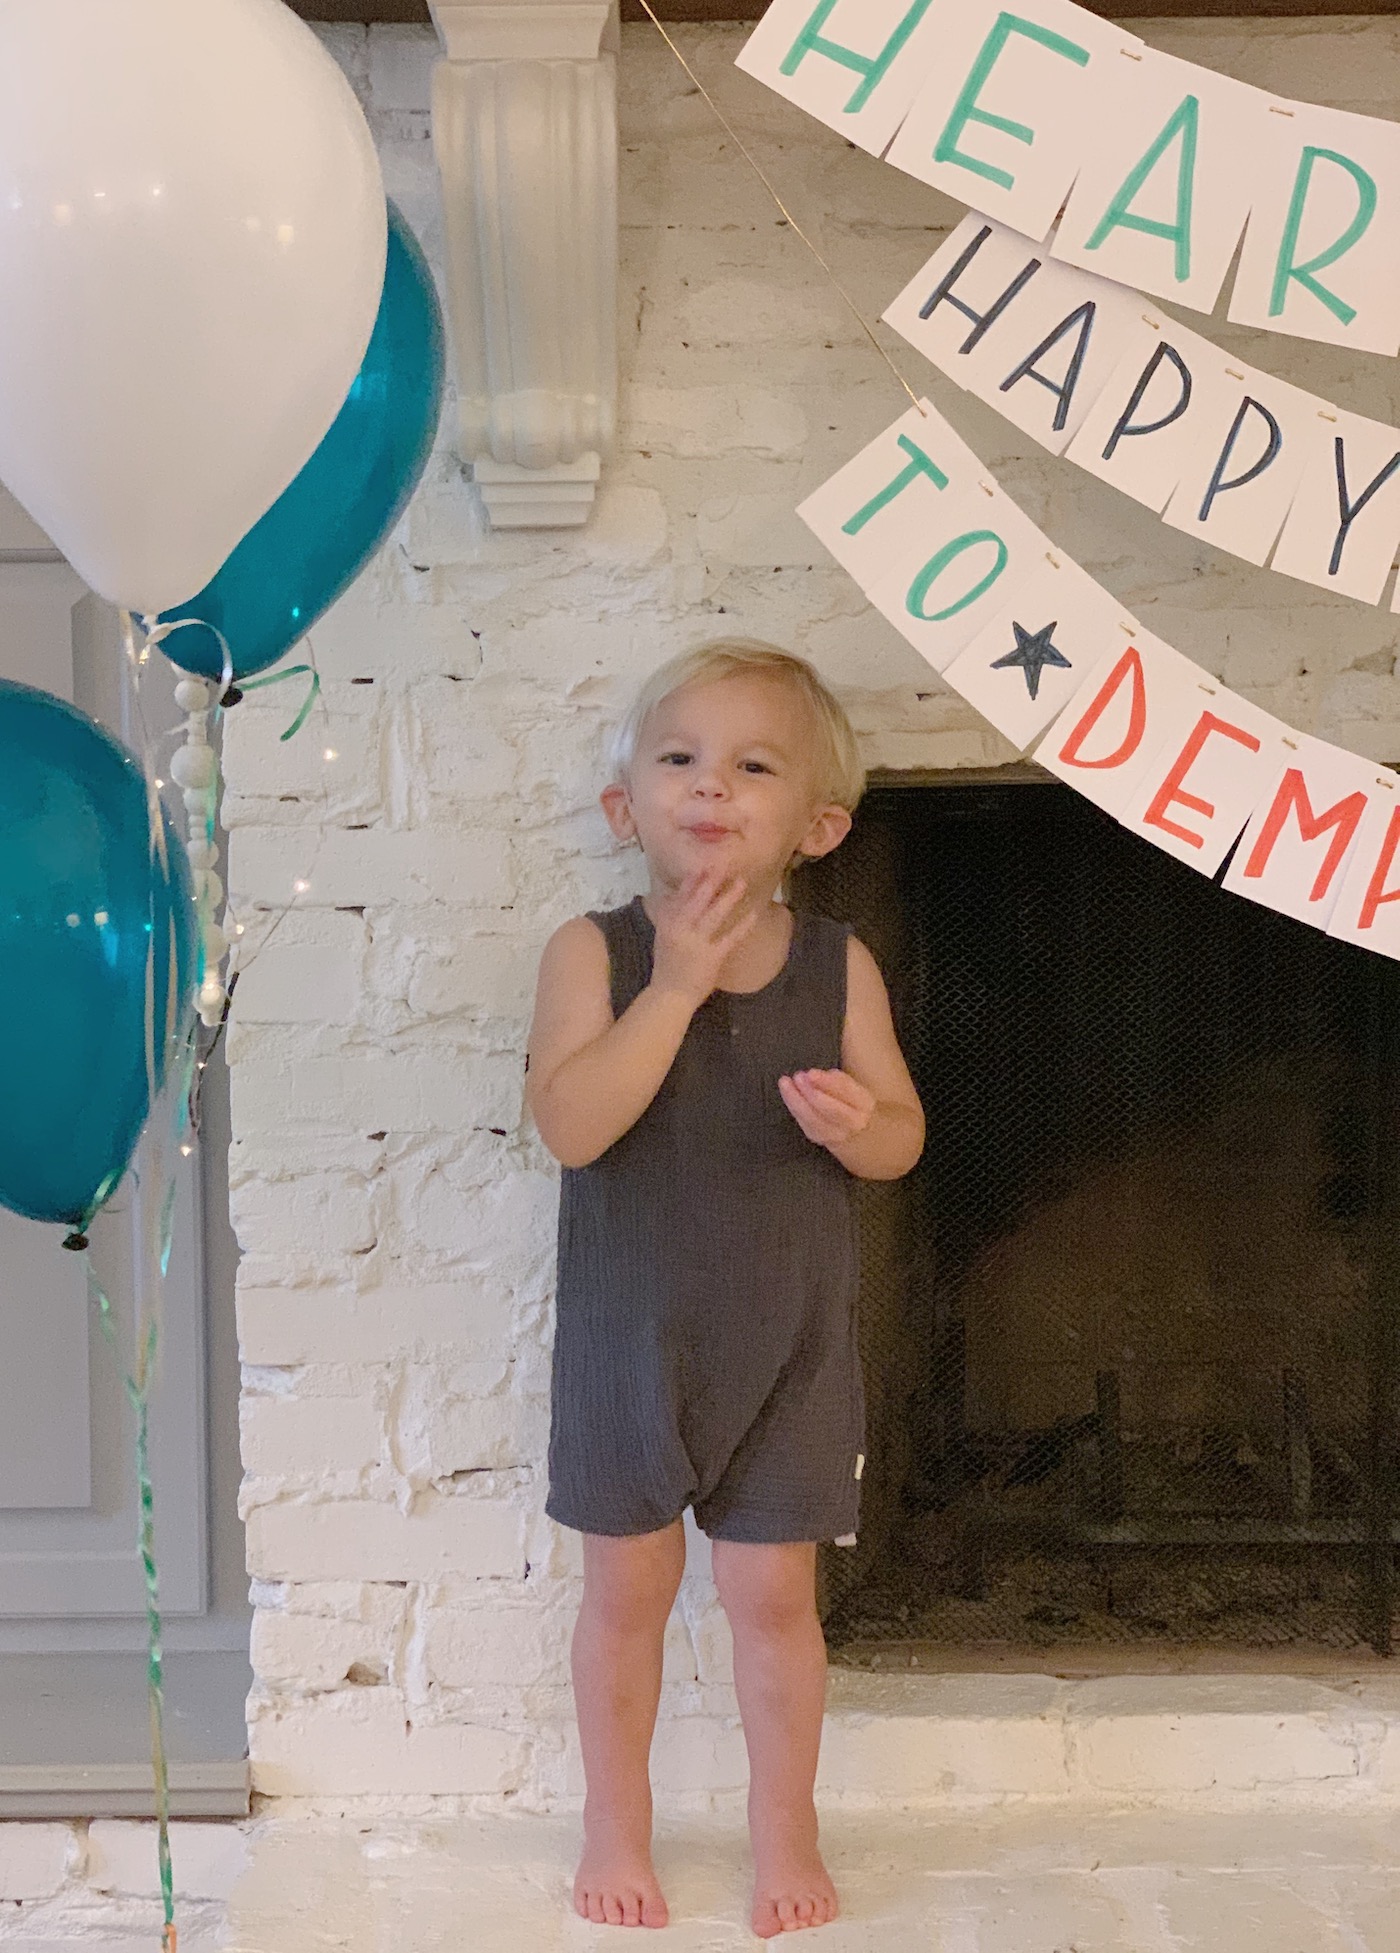 Dempsey's Hearing Birthday. His cochlear implants have been turned on for one whole year now! 